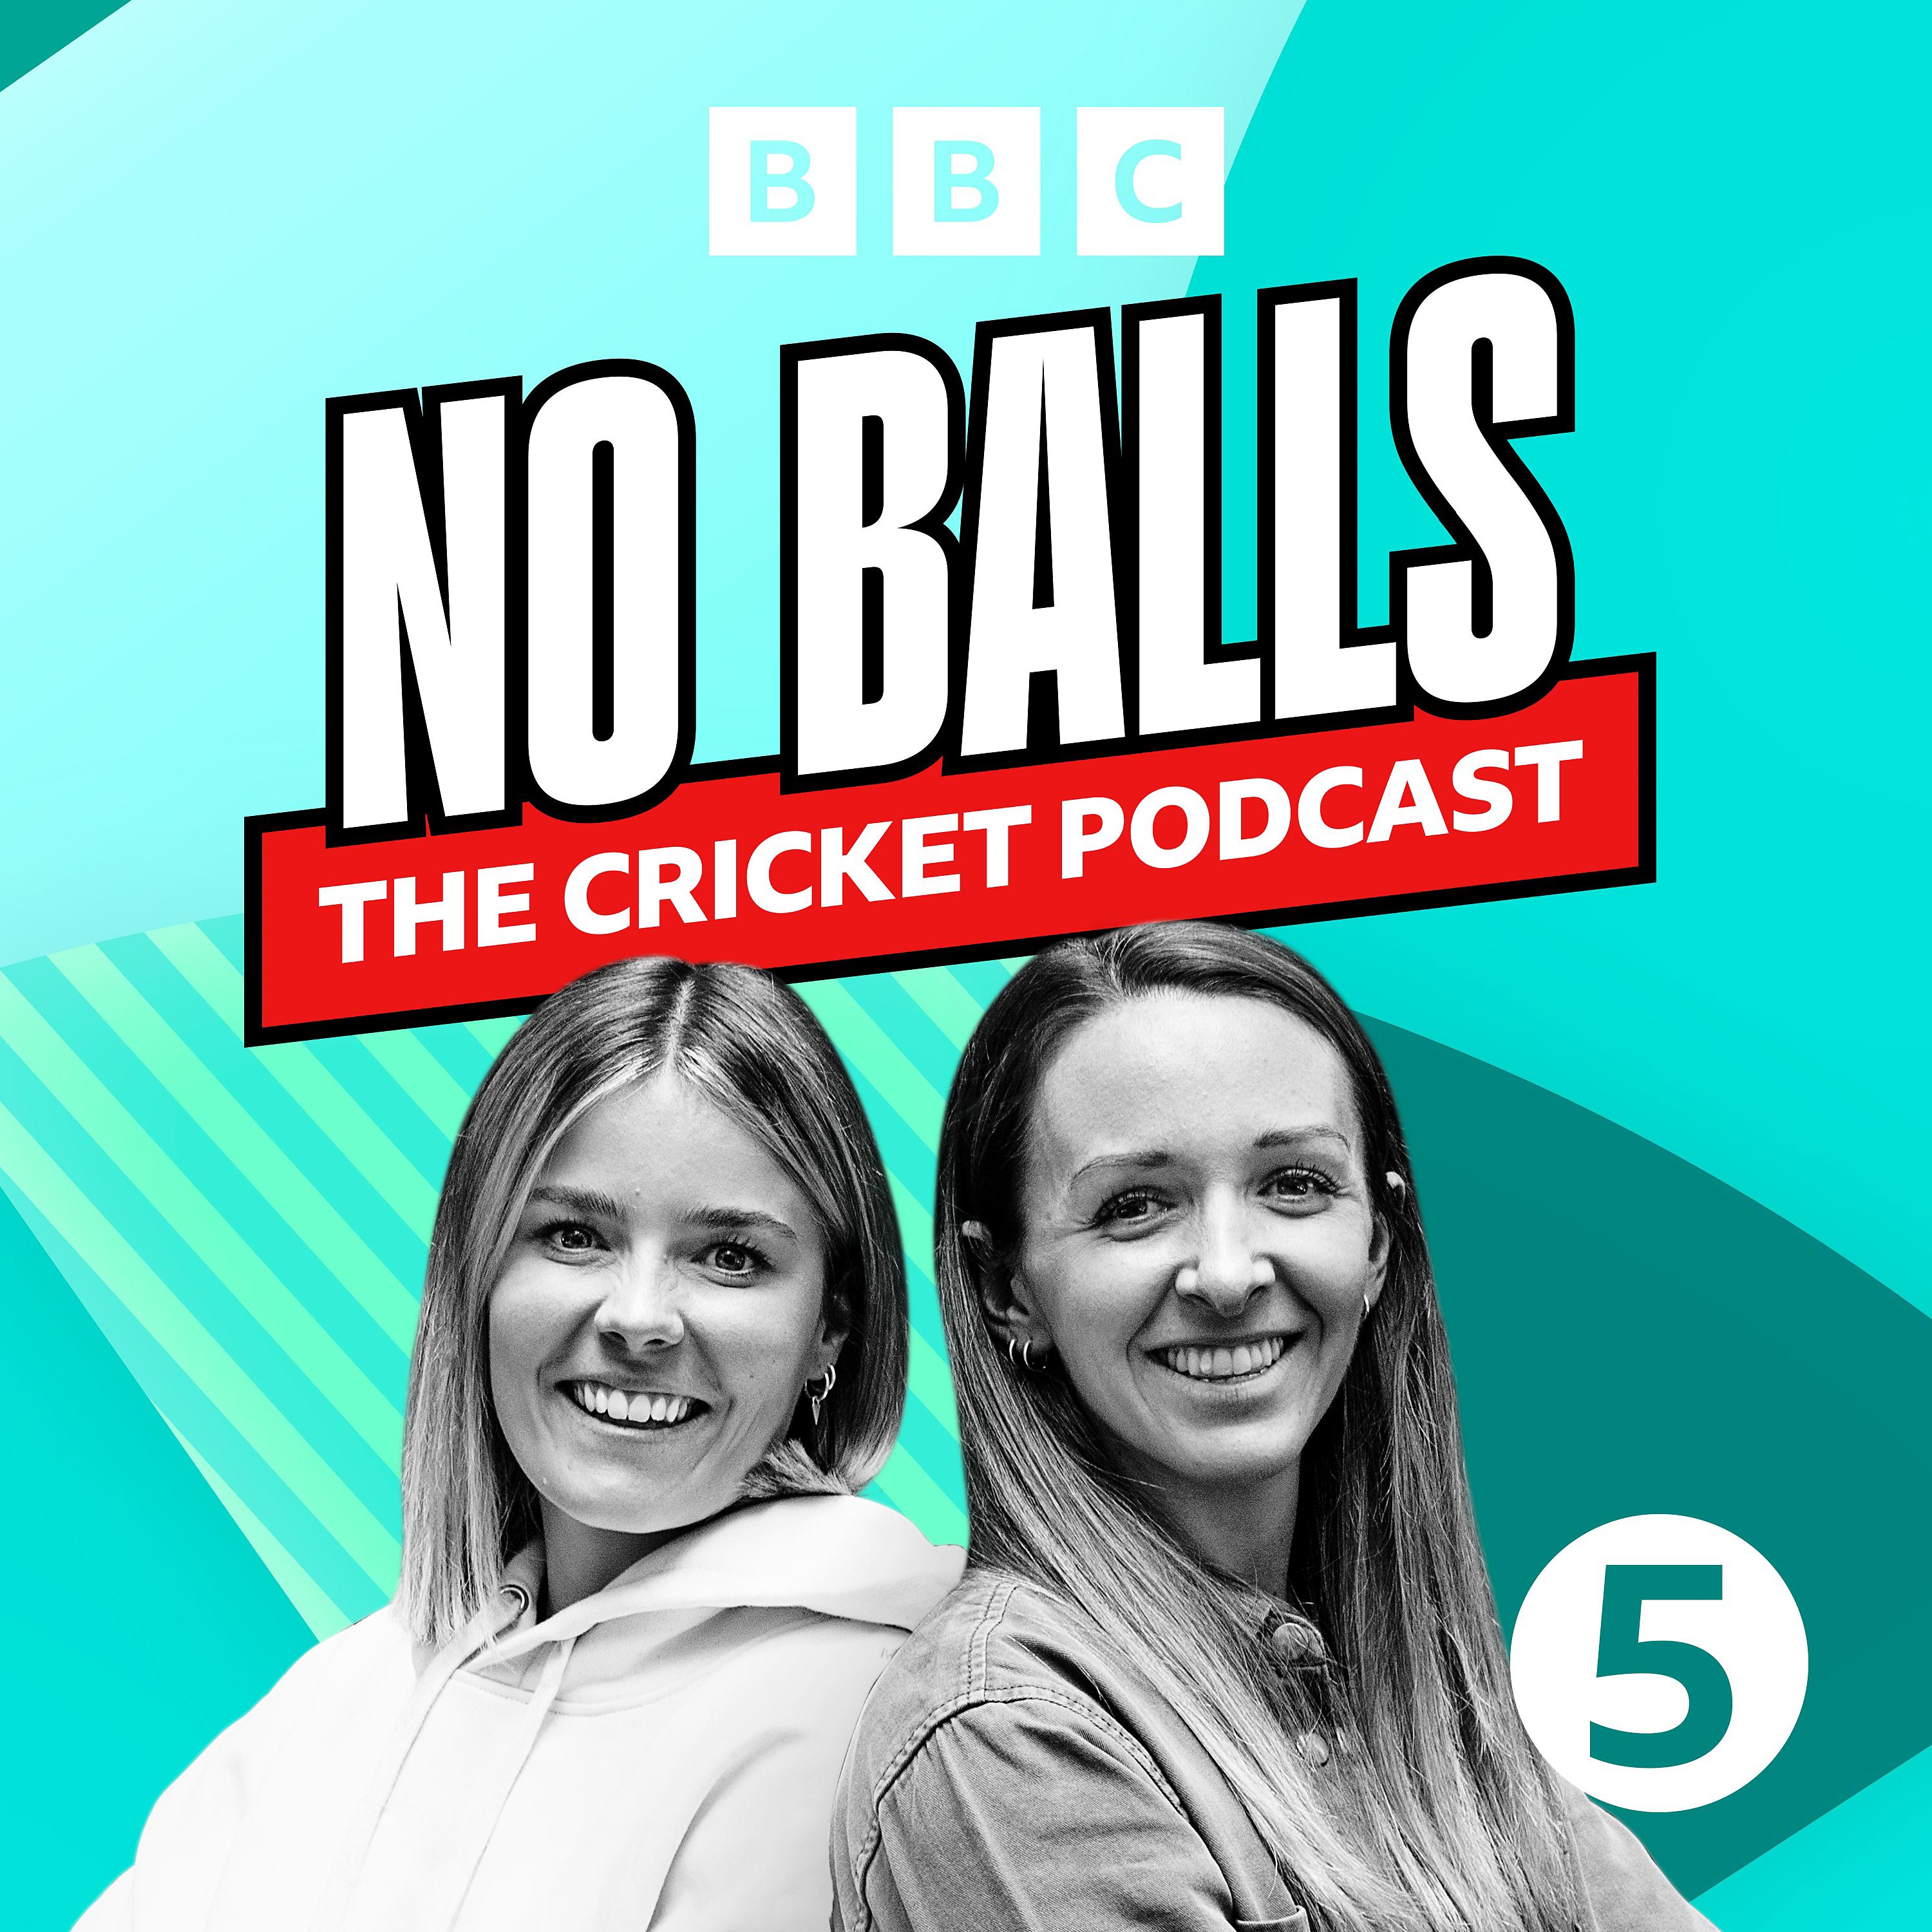 No Balls: The Cricket Podcast - EMERGENCY! CROSSY'S AN RCB PLAYER!